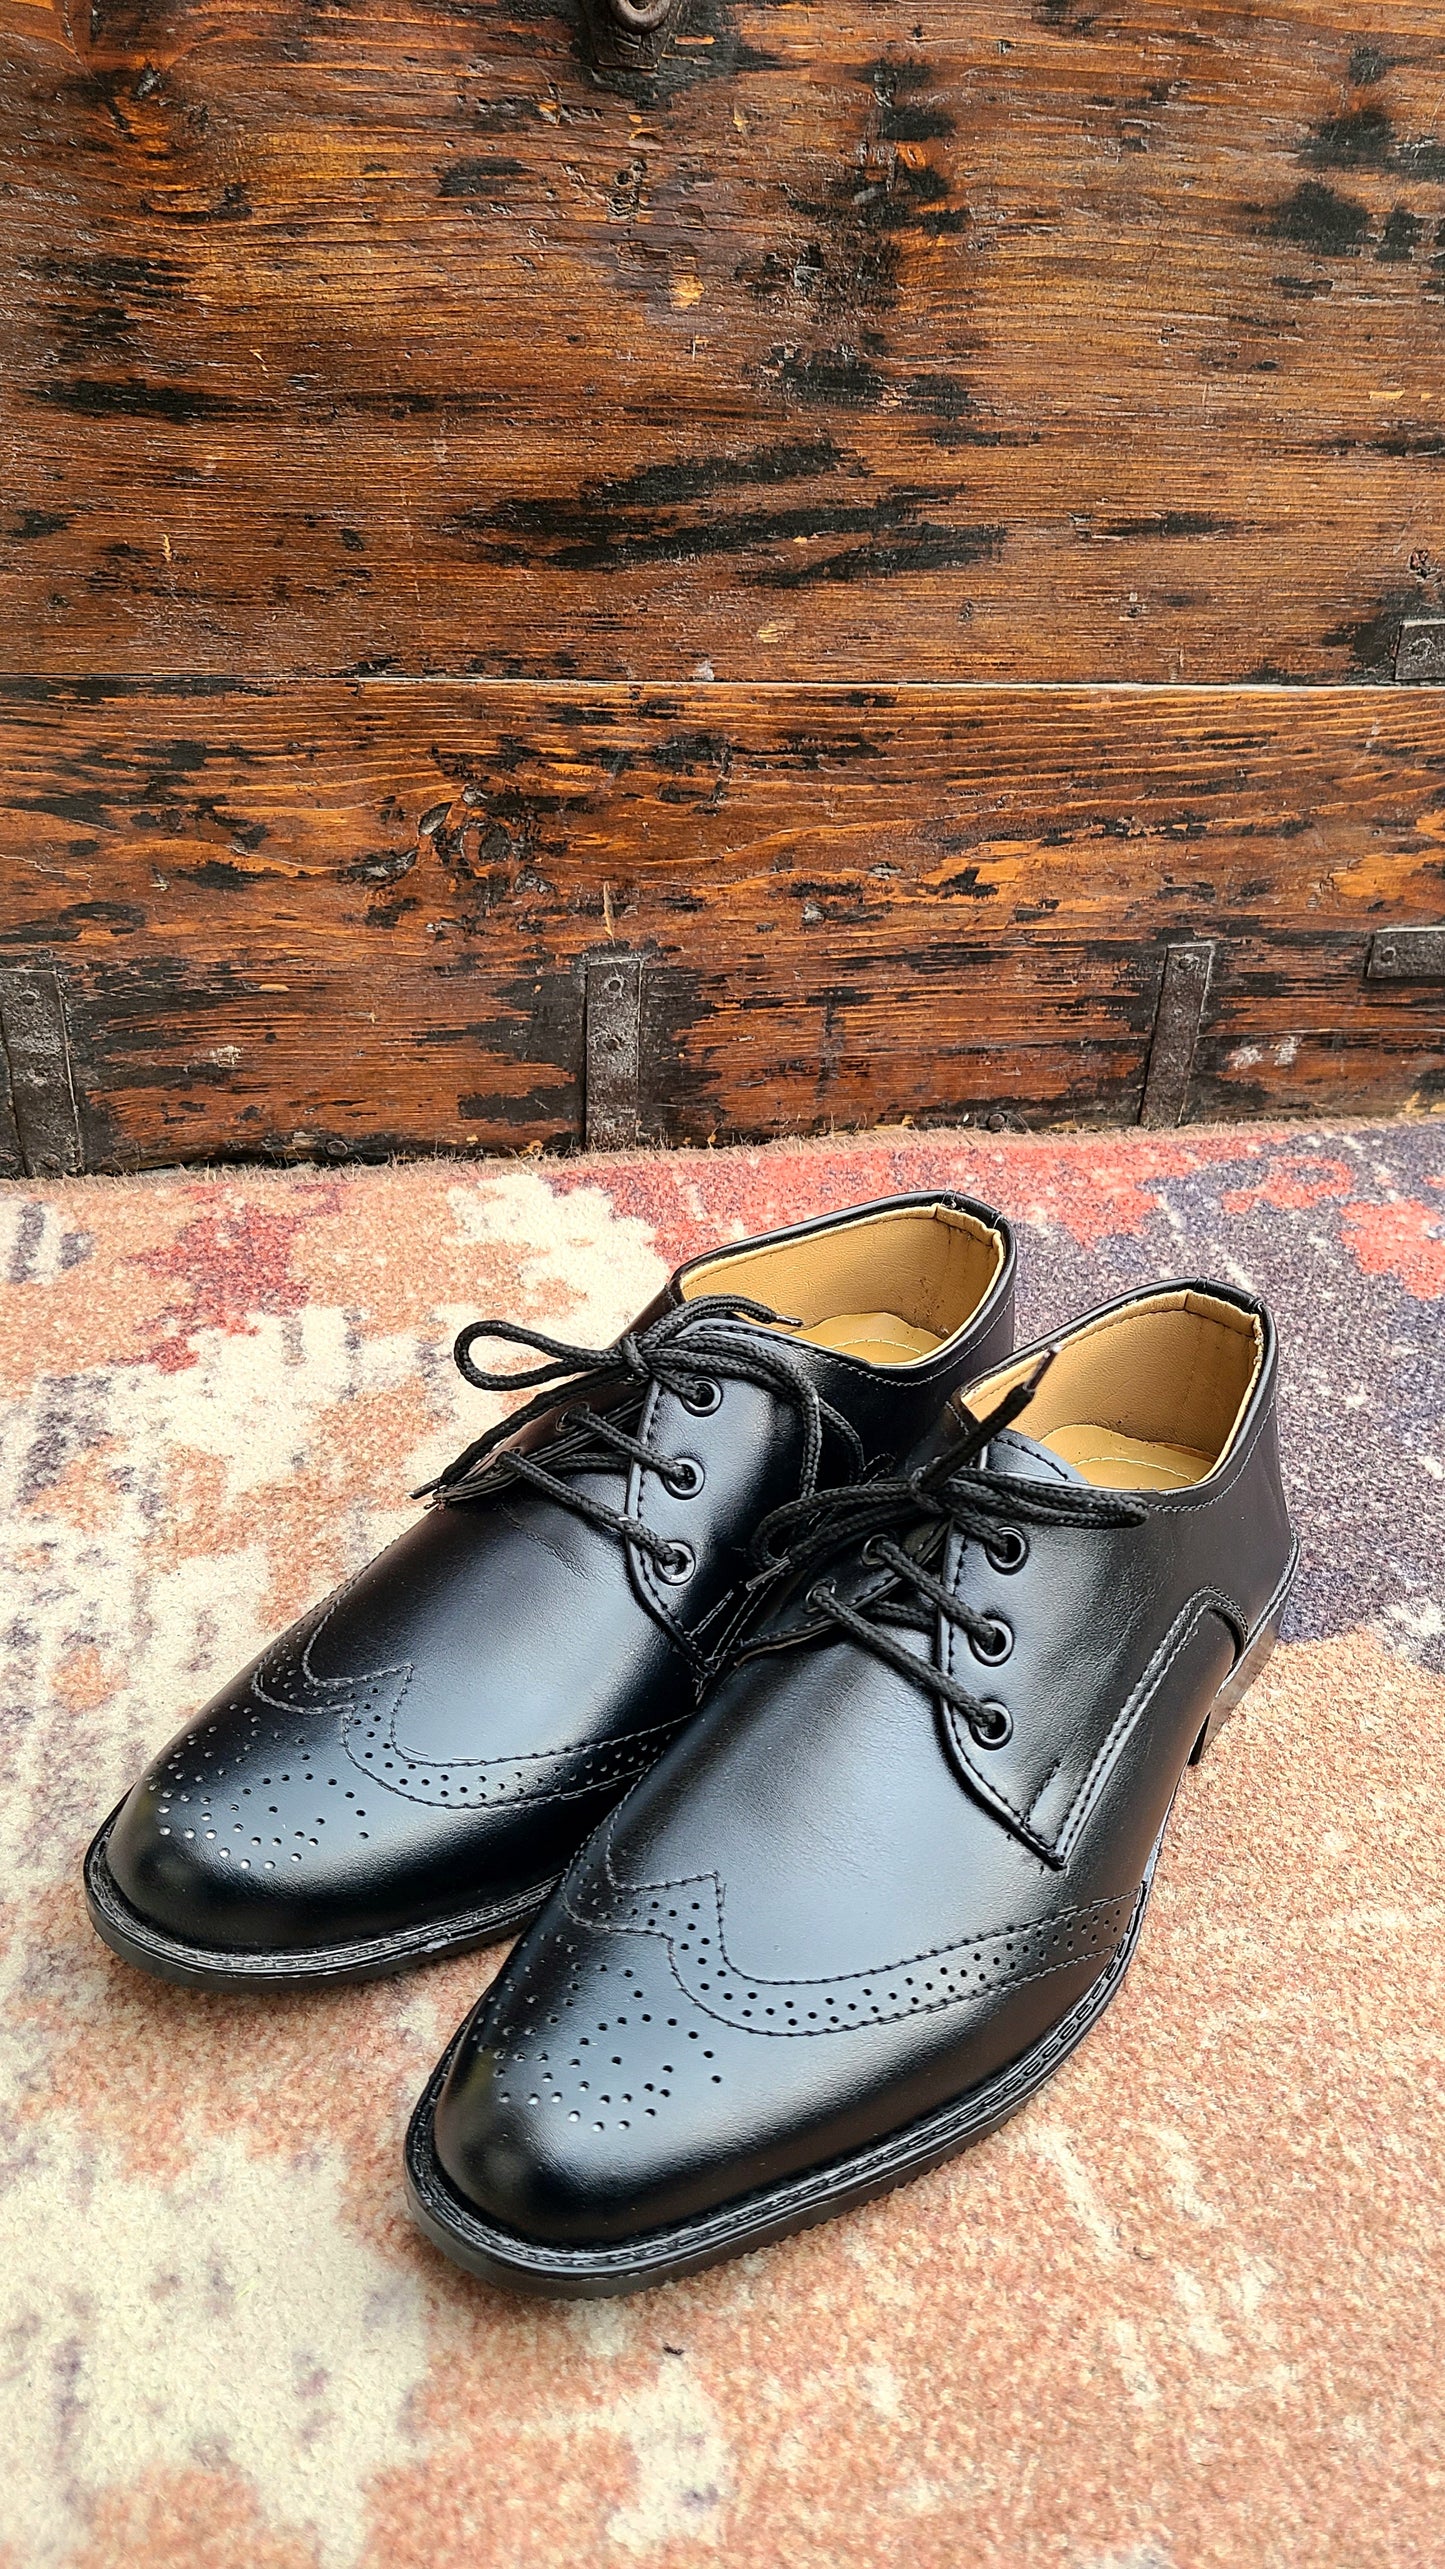 The Classic Brogues